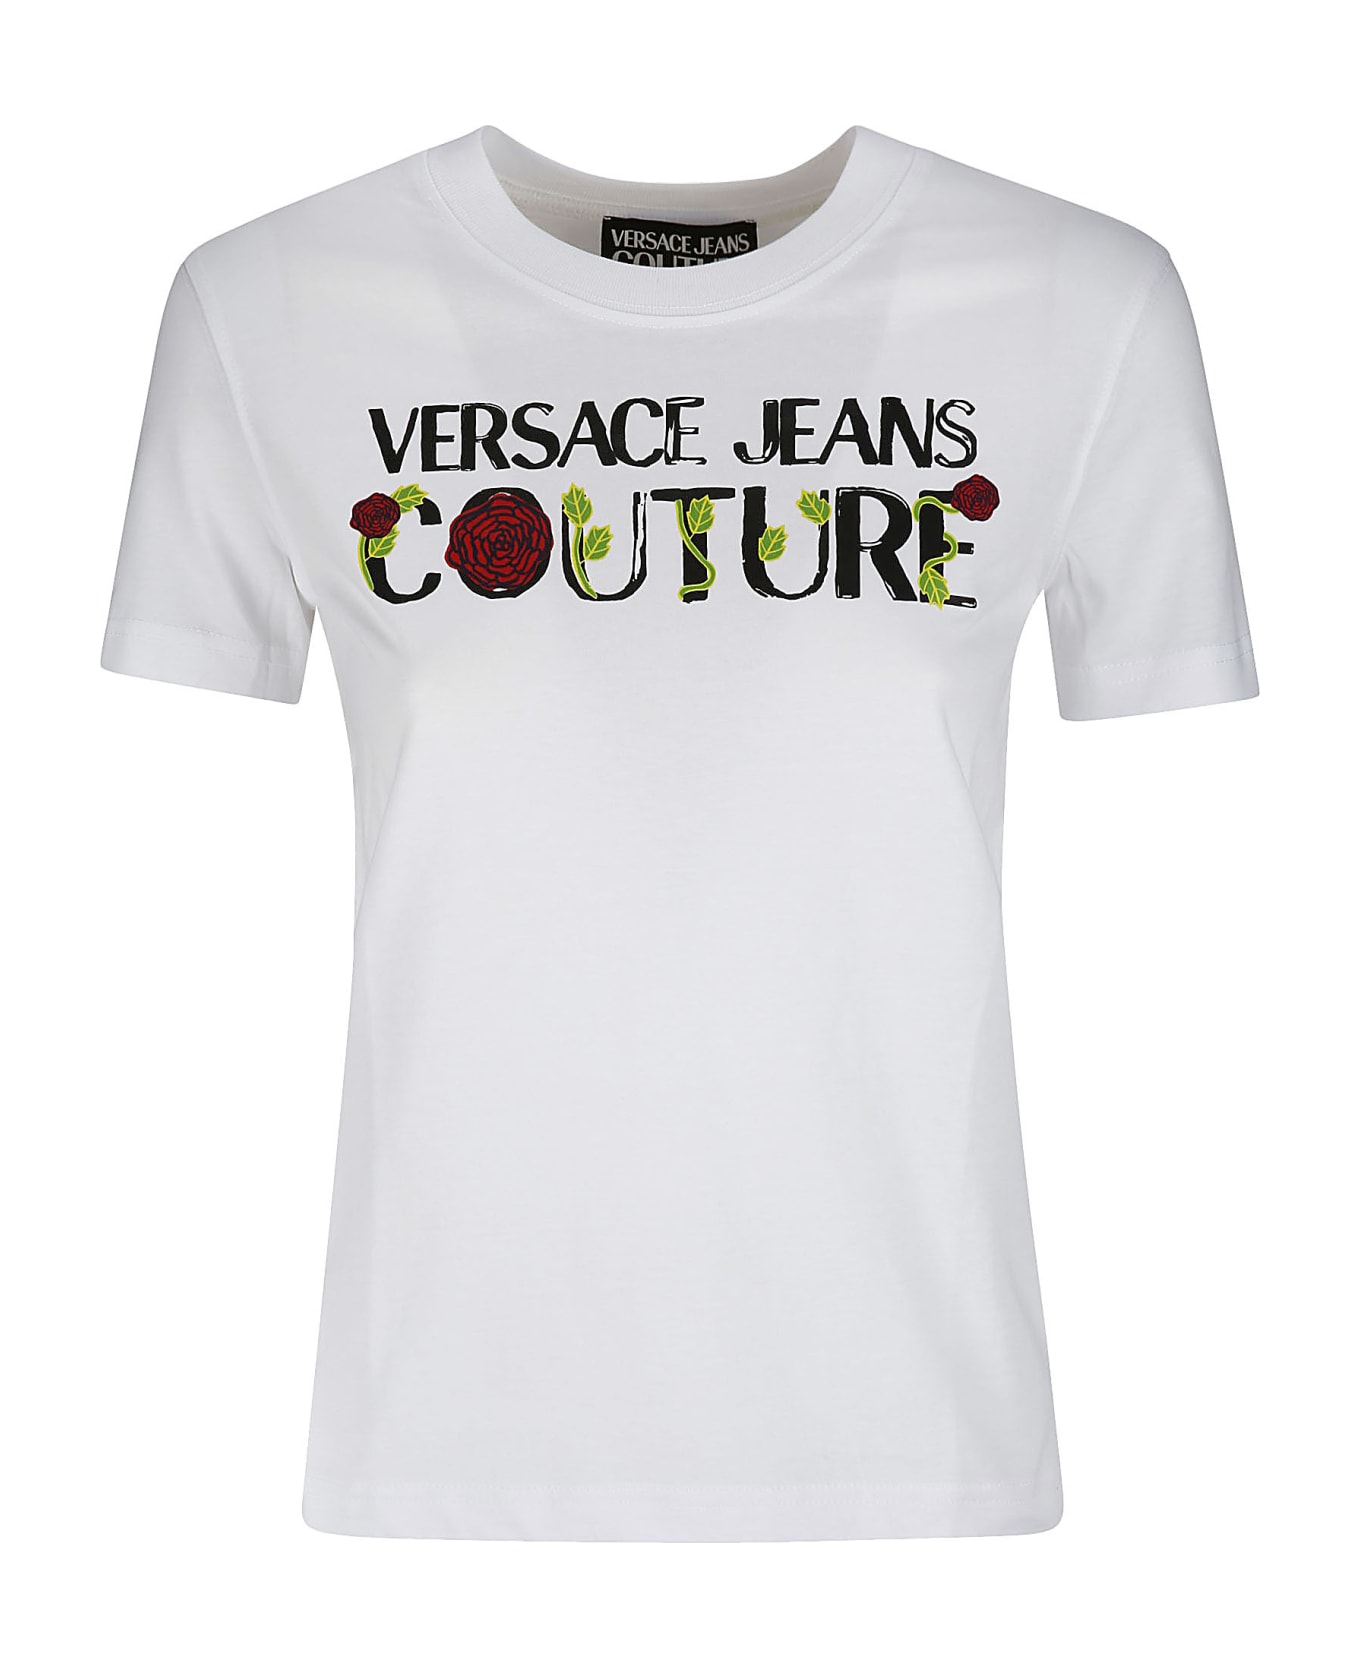 Versace Jeans Couture T-shirt - 003